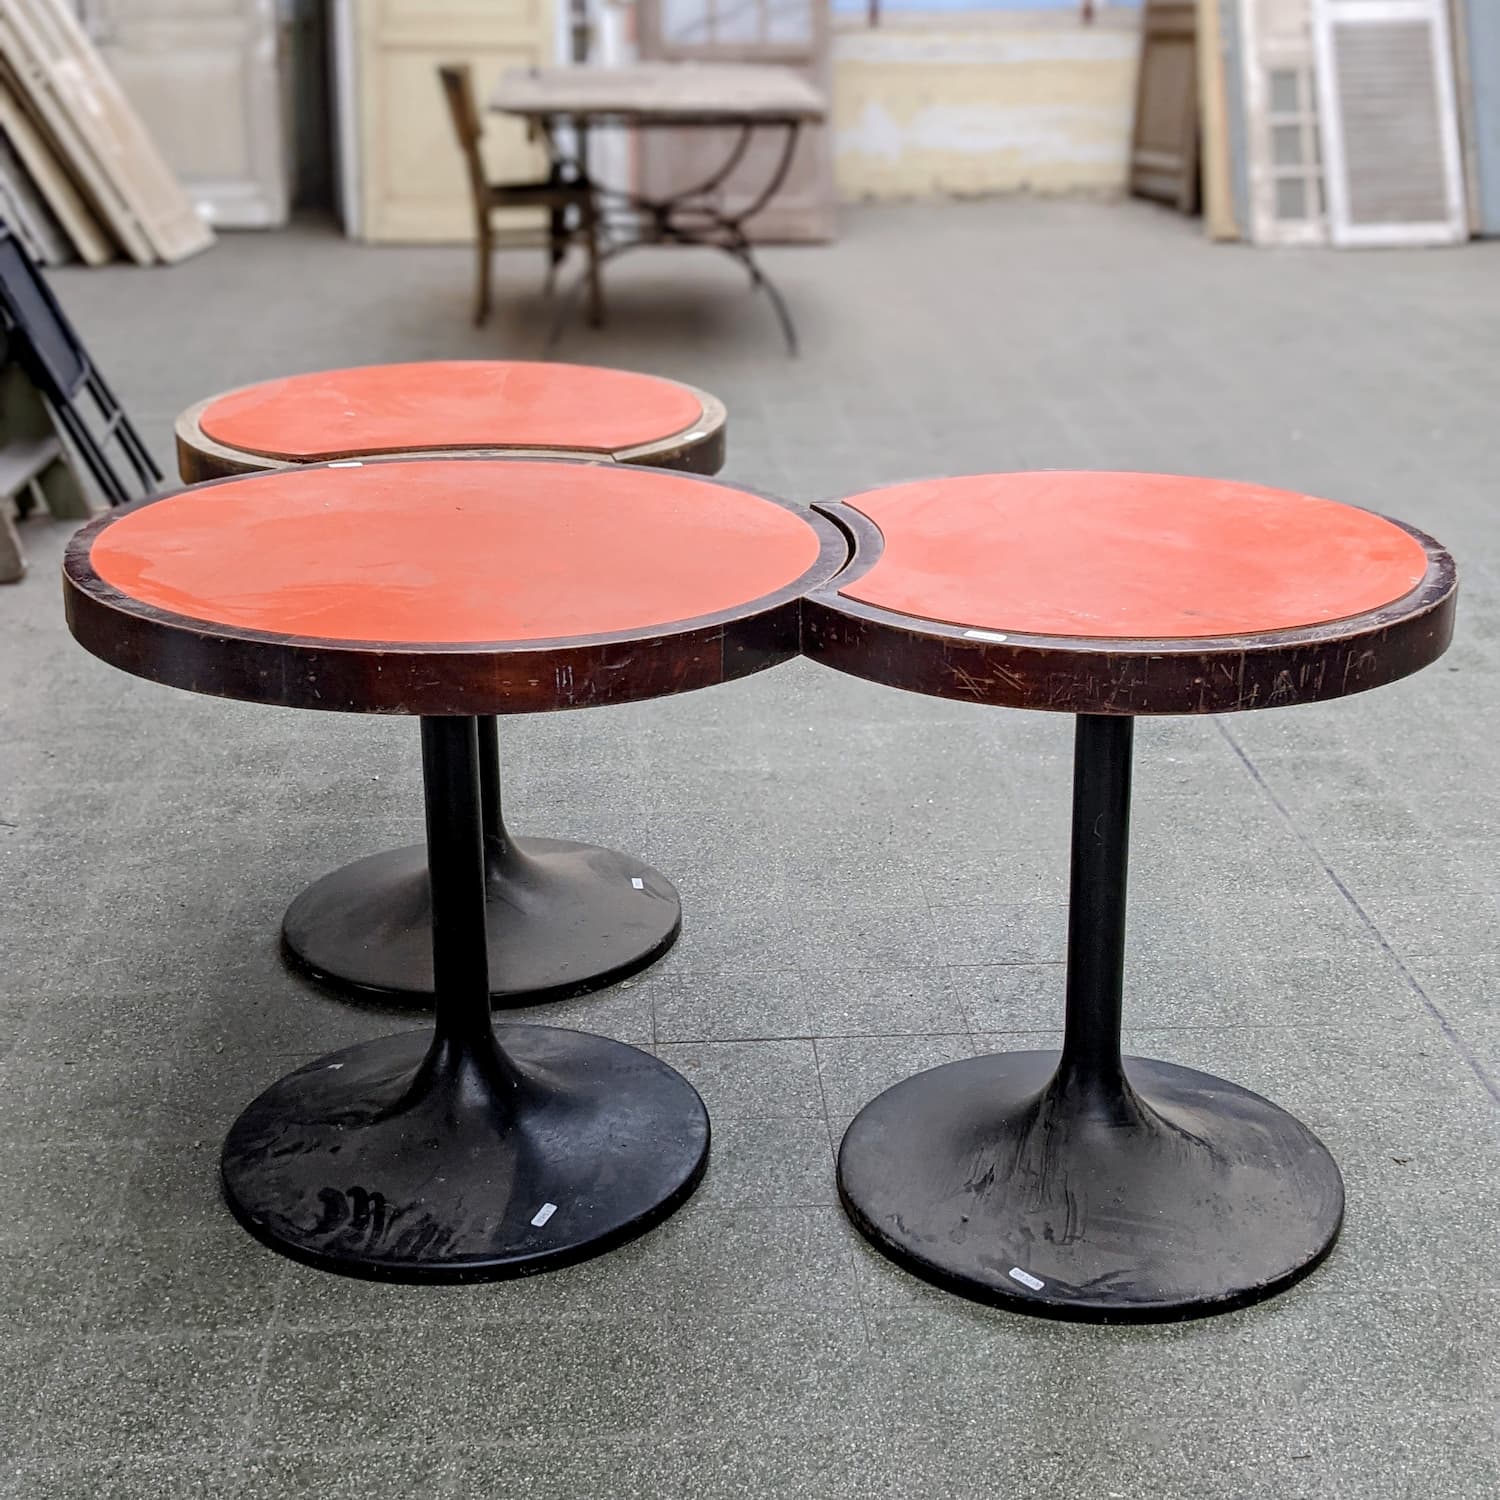 Set of 3 tables